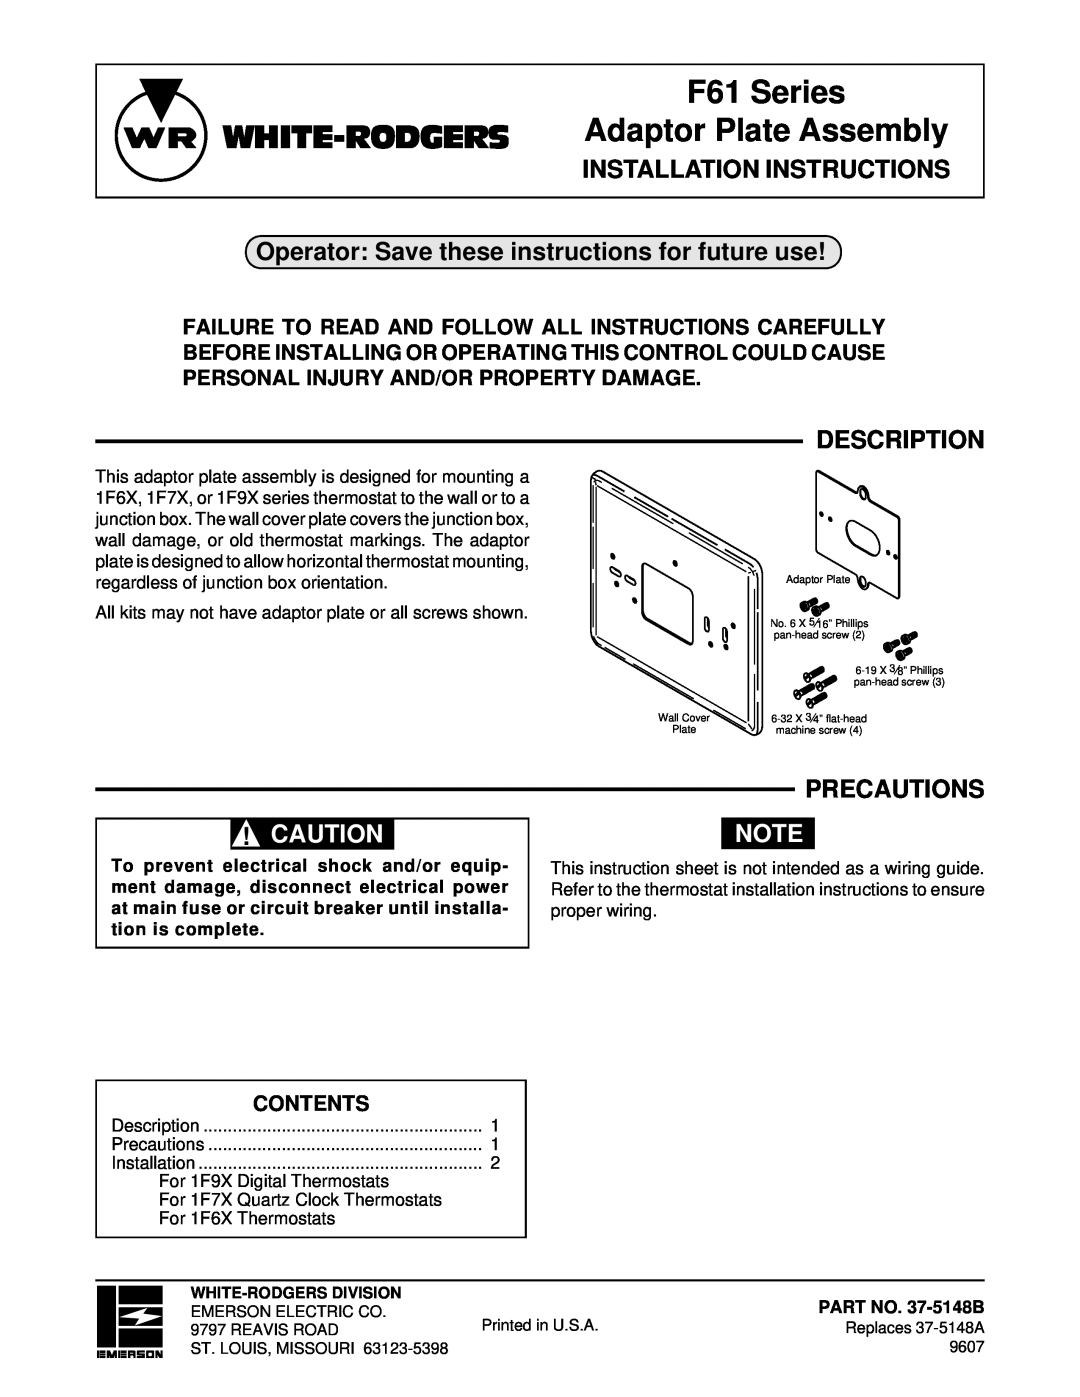 White Rodgers 37-5148B installation instructions Operator: Save these instructions for future use, Description, F61 Series 